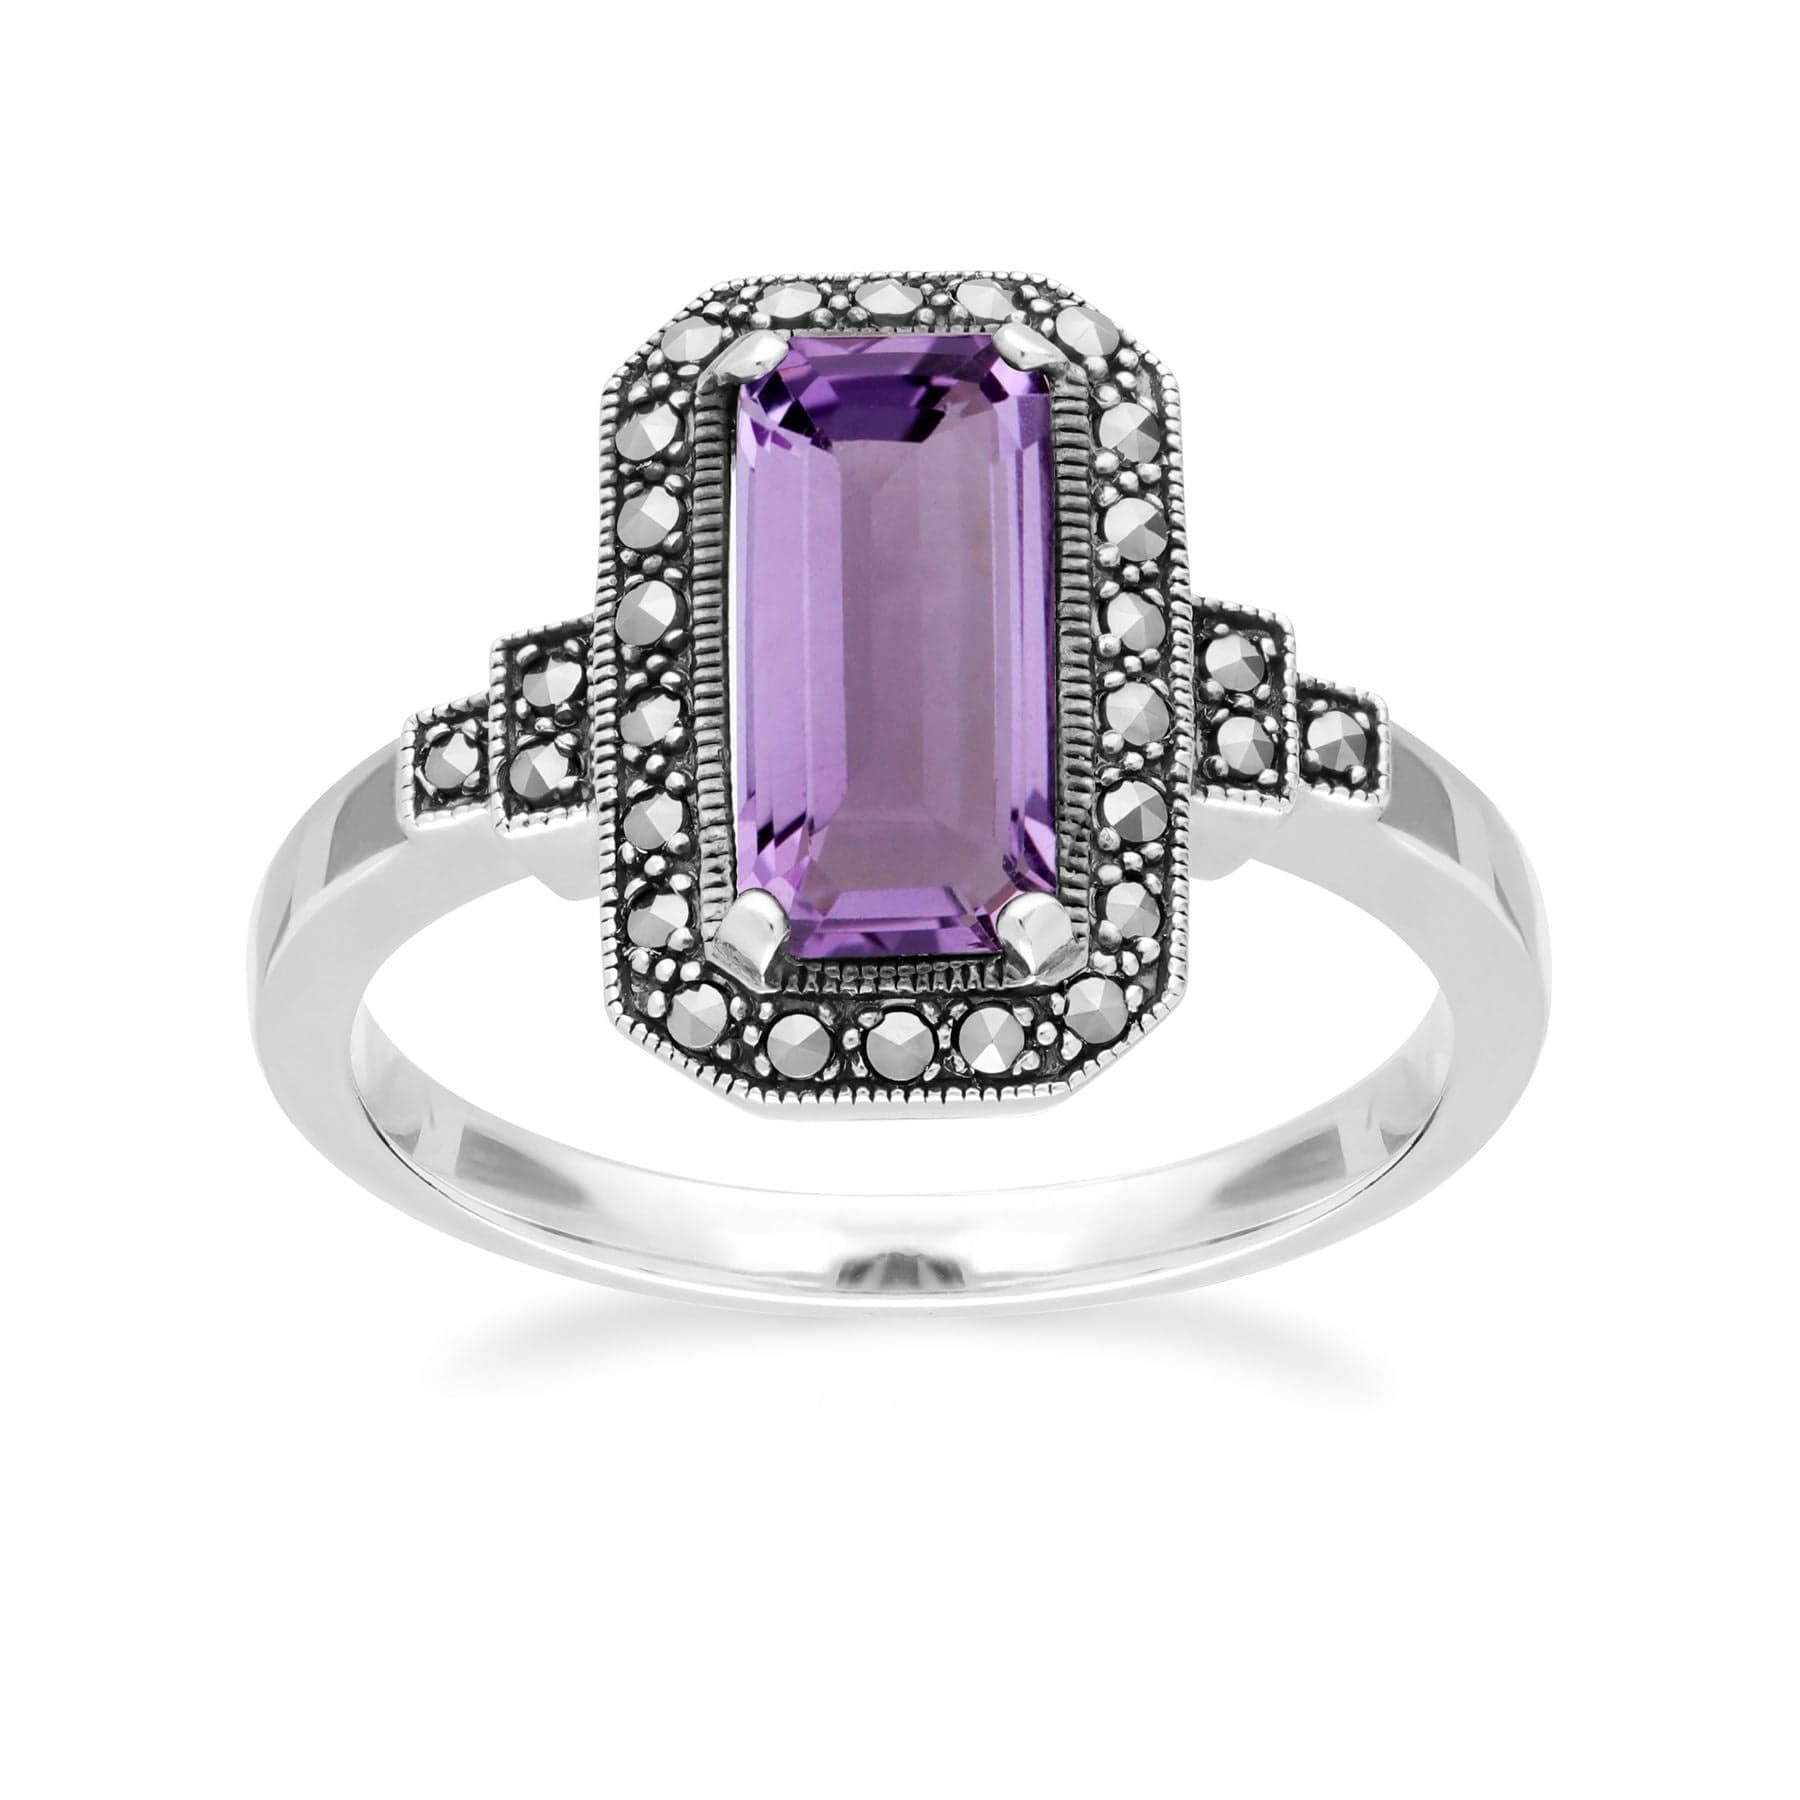 214R614703925 Art Deco Inspired Octagon Cut Amethyst & Marcasite Ring In Sterling Silver 3